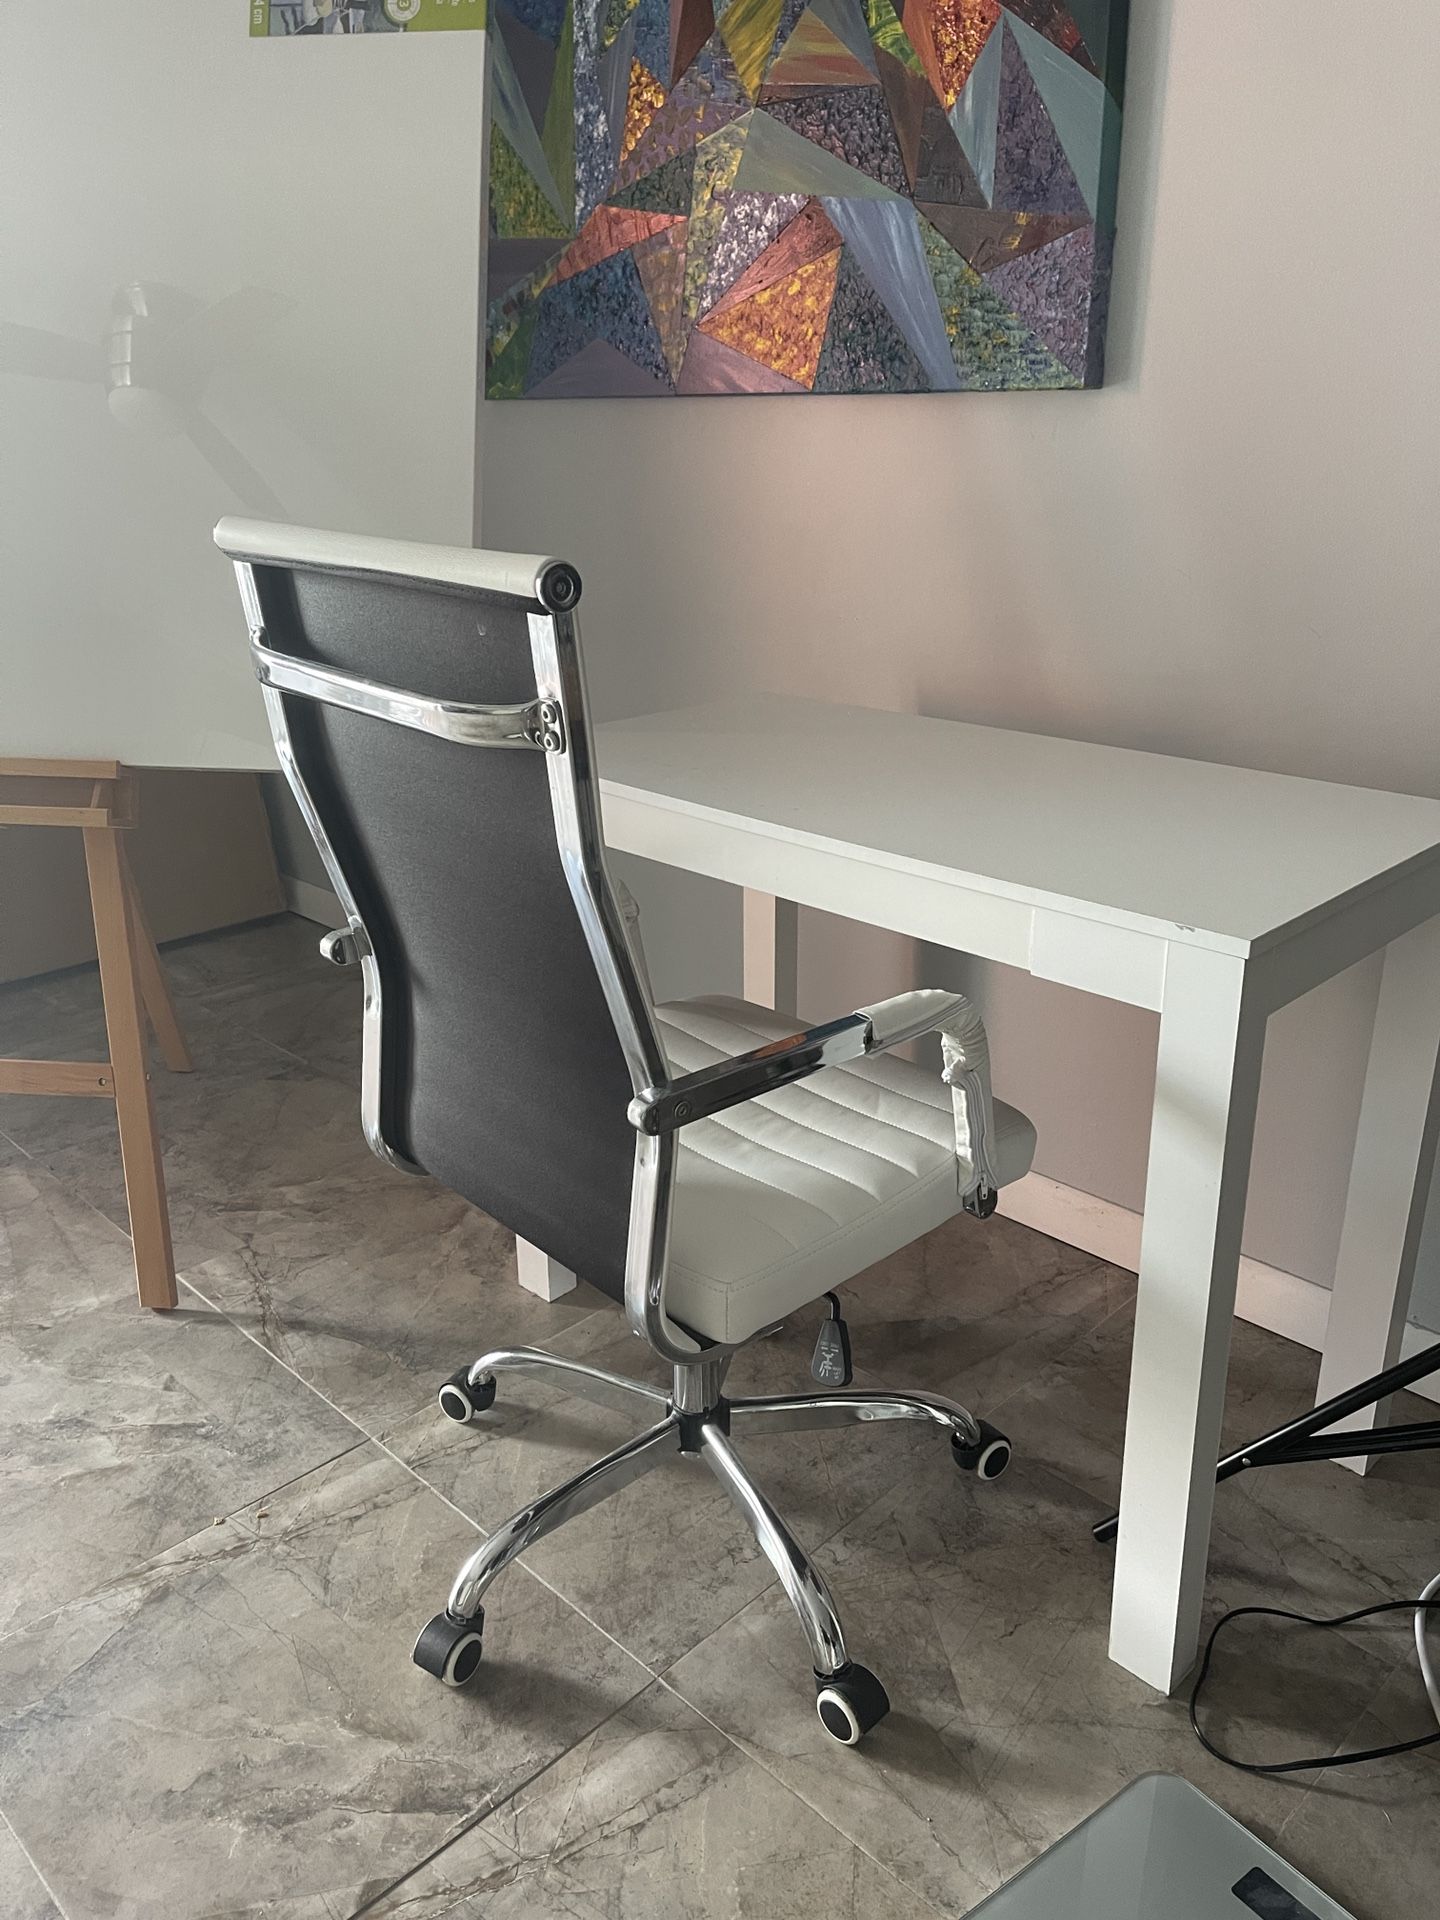 White Modern Desk And Chair 39in wide by 20 long With A Drawer